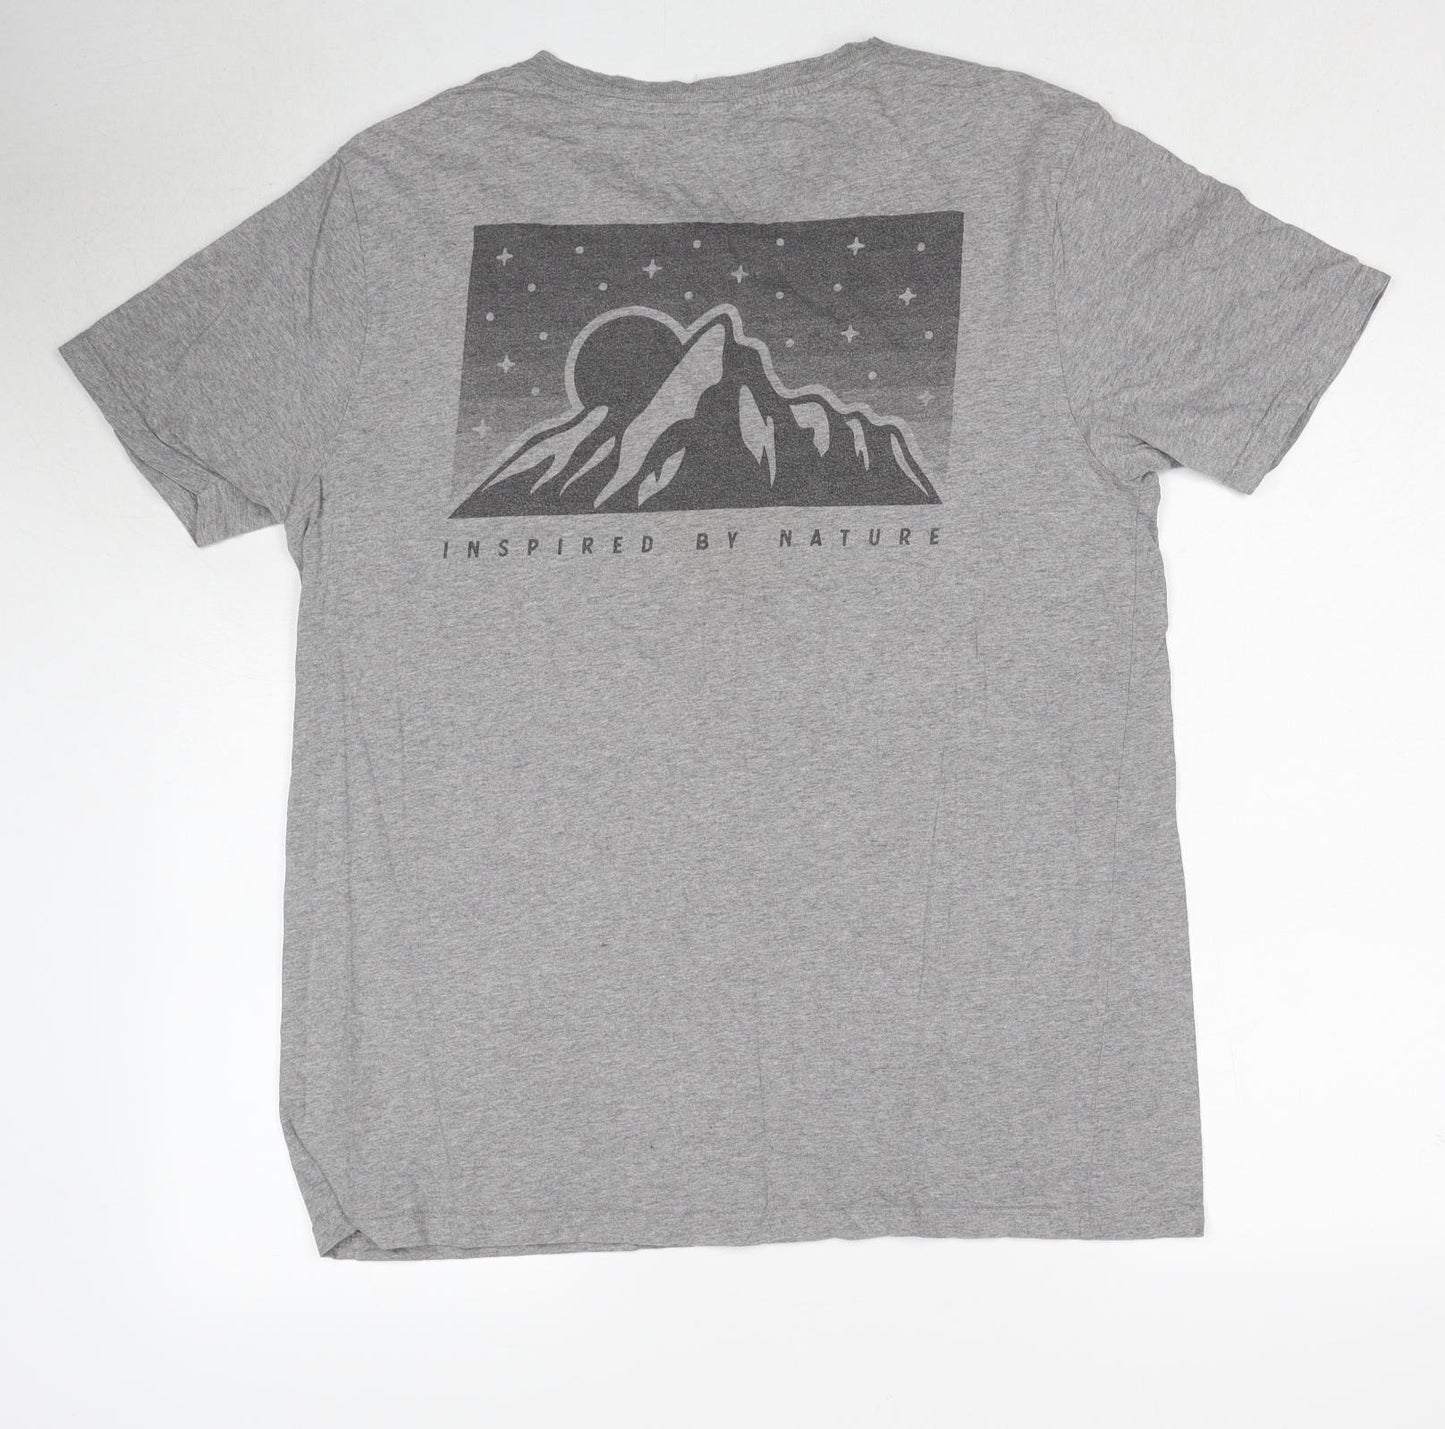 Earth Positive Mens Grey Cotton T-Shirt Size L Round Neck - Inspired By Nature